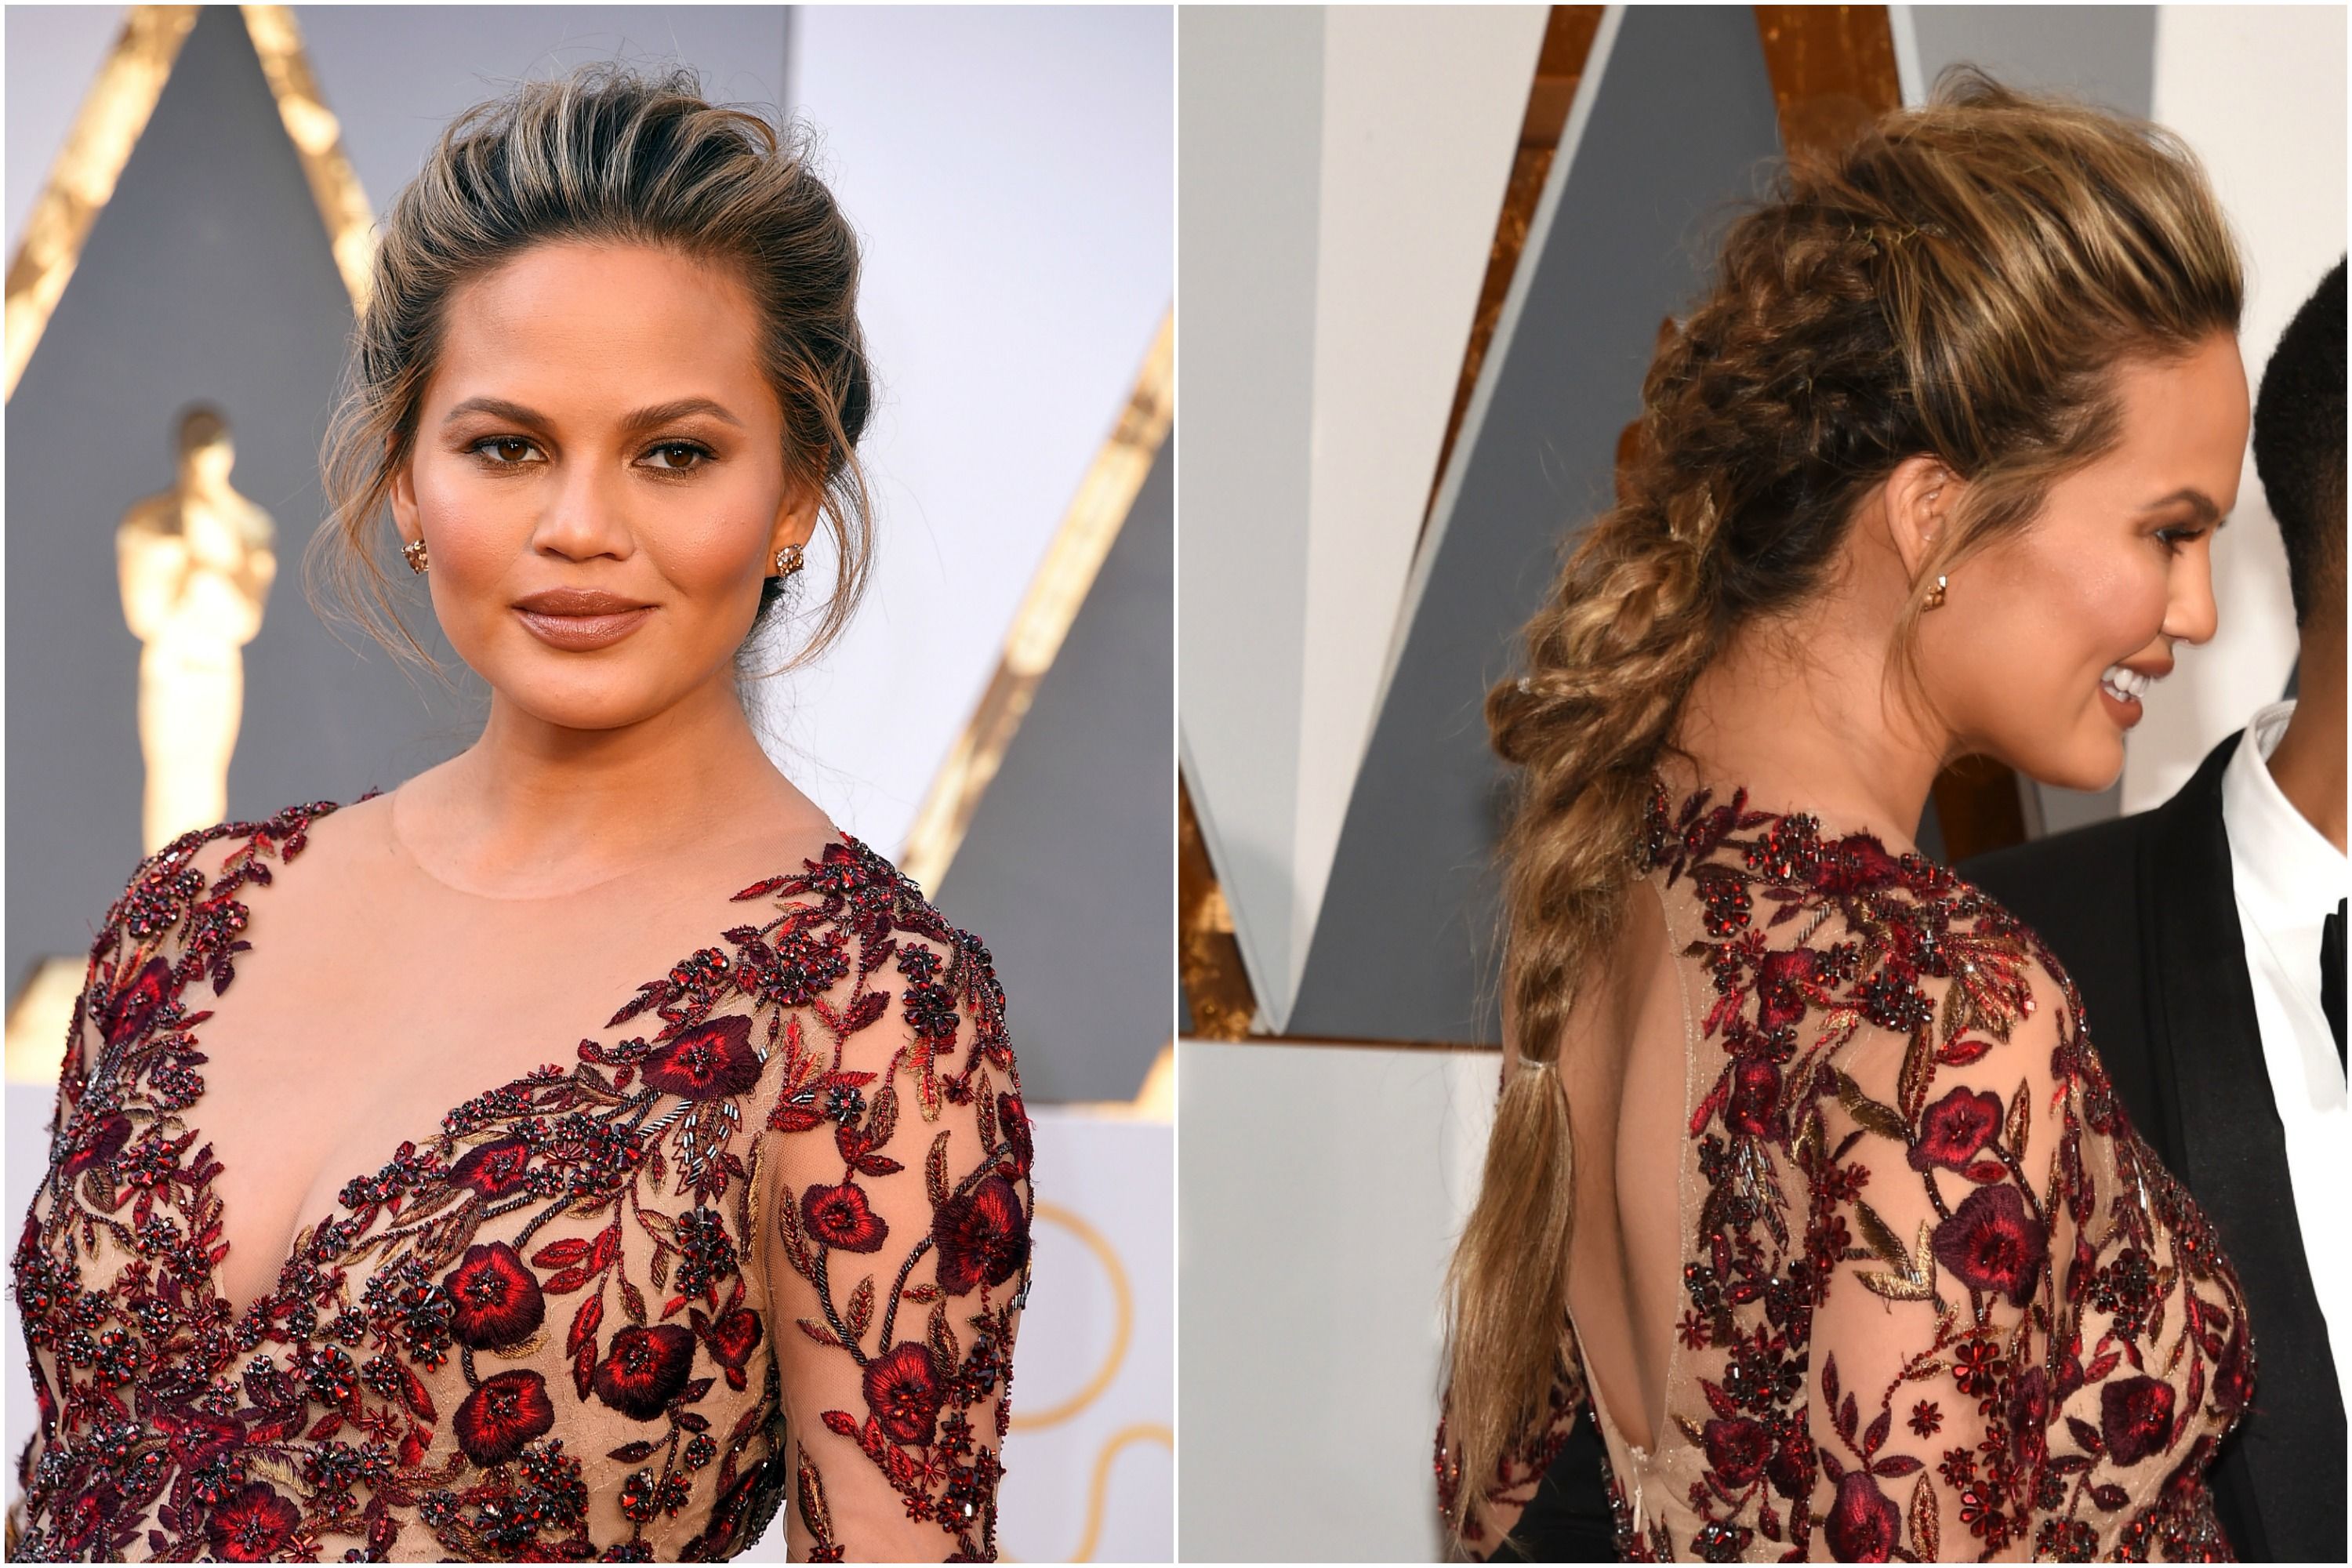 The 13 Best Hairstyles of the 2016 Oscars Red Carpet — Best of Oscars Beauty